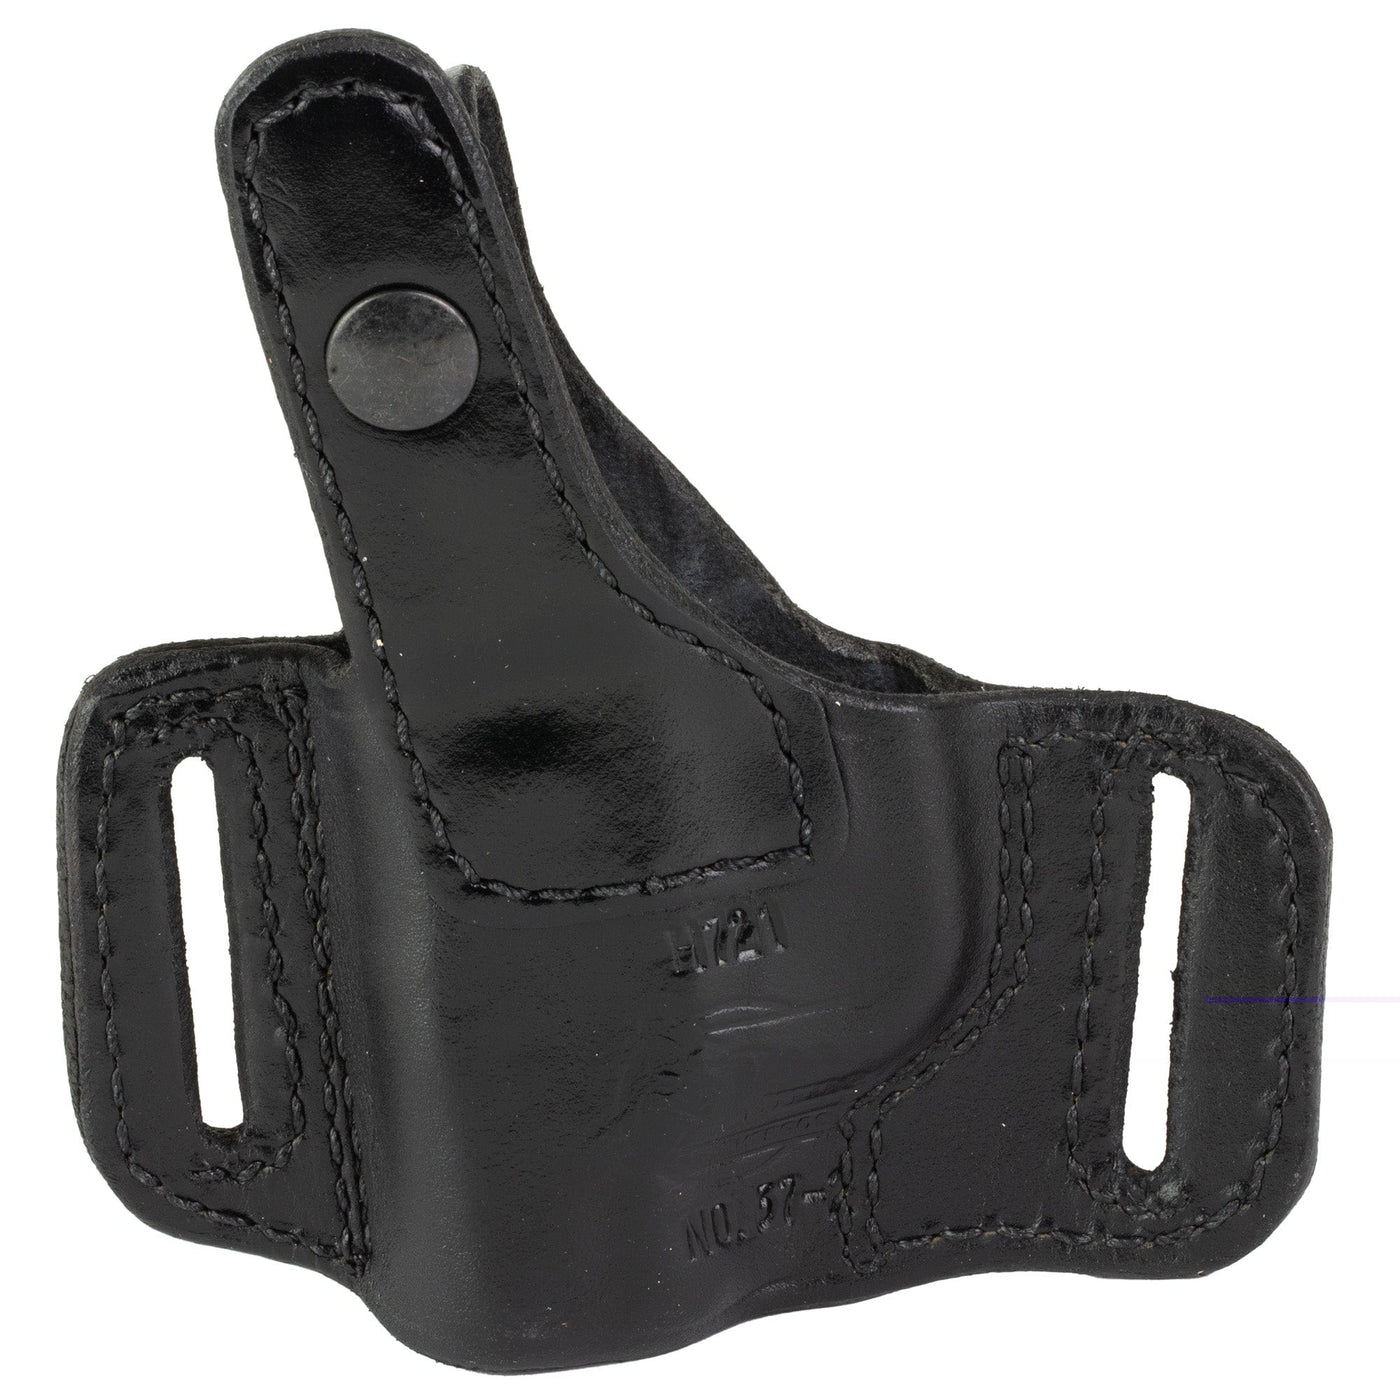 Don Hume D Hume 721-p Ruger Lcp Ii/max Blk Rh Holsters